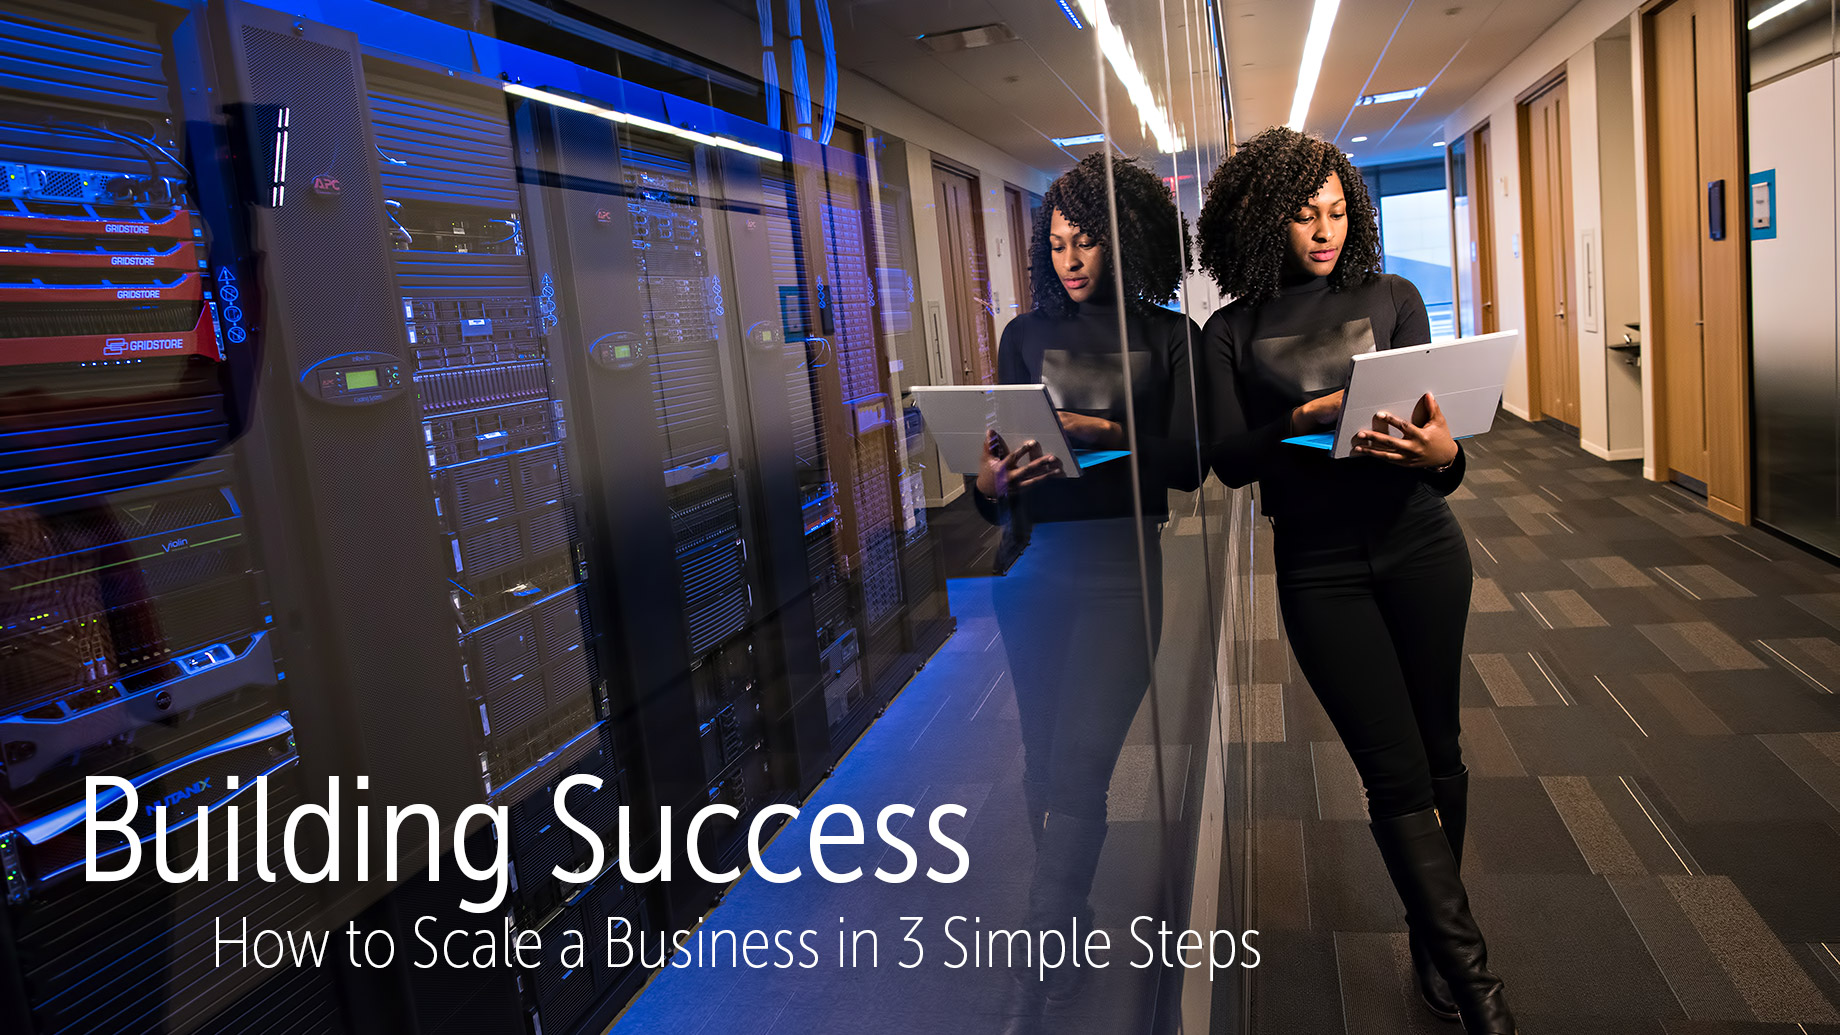 Building Success - How to Scale a Business in 3 Simple Steps